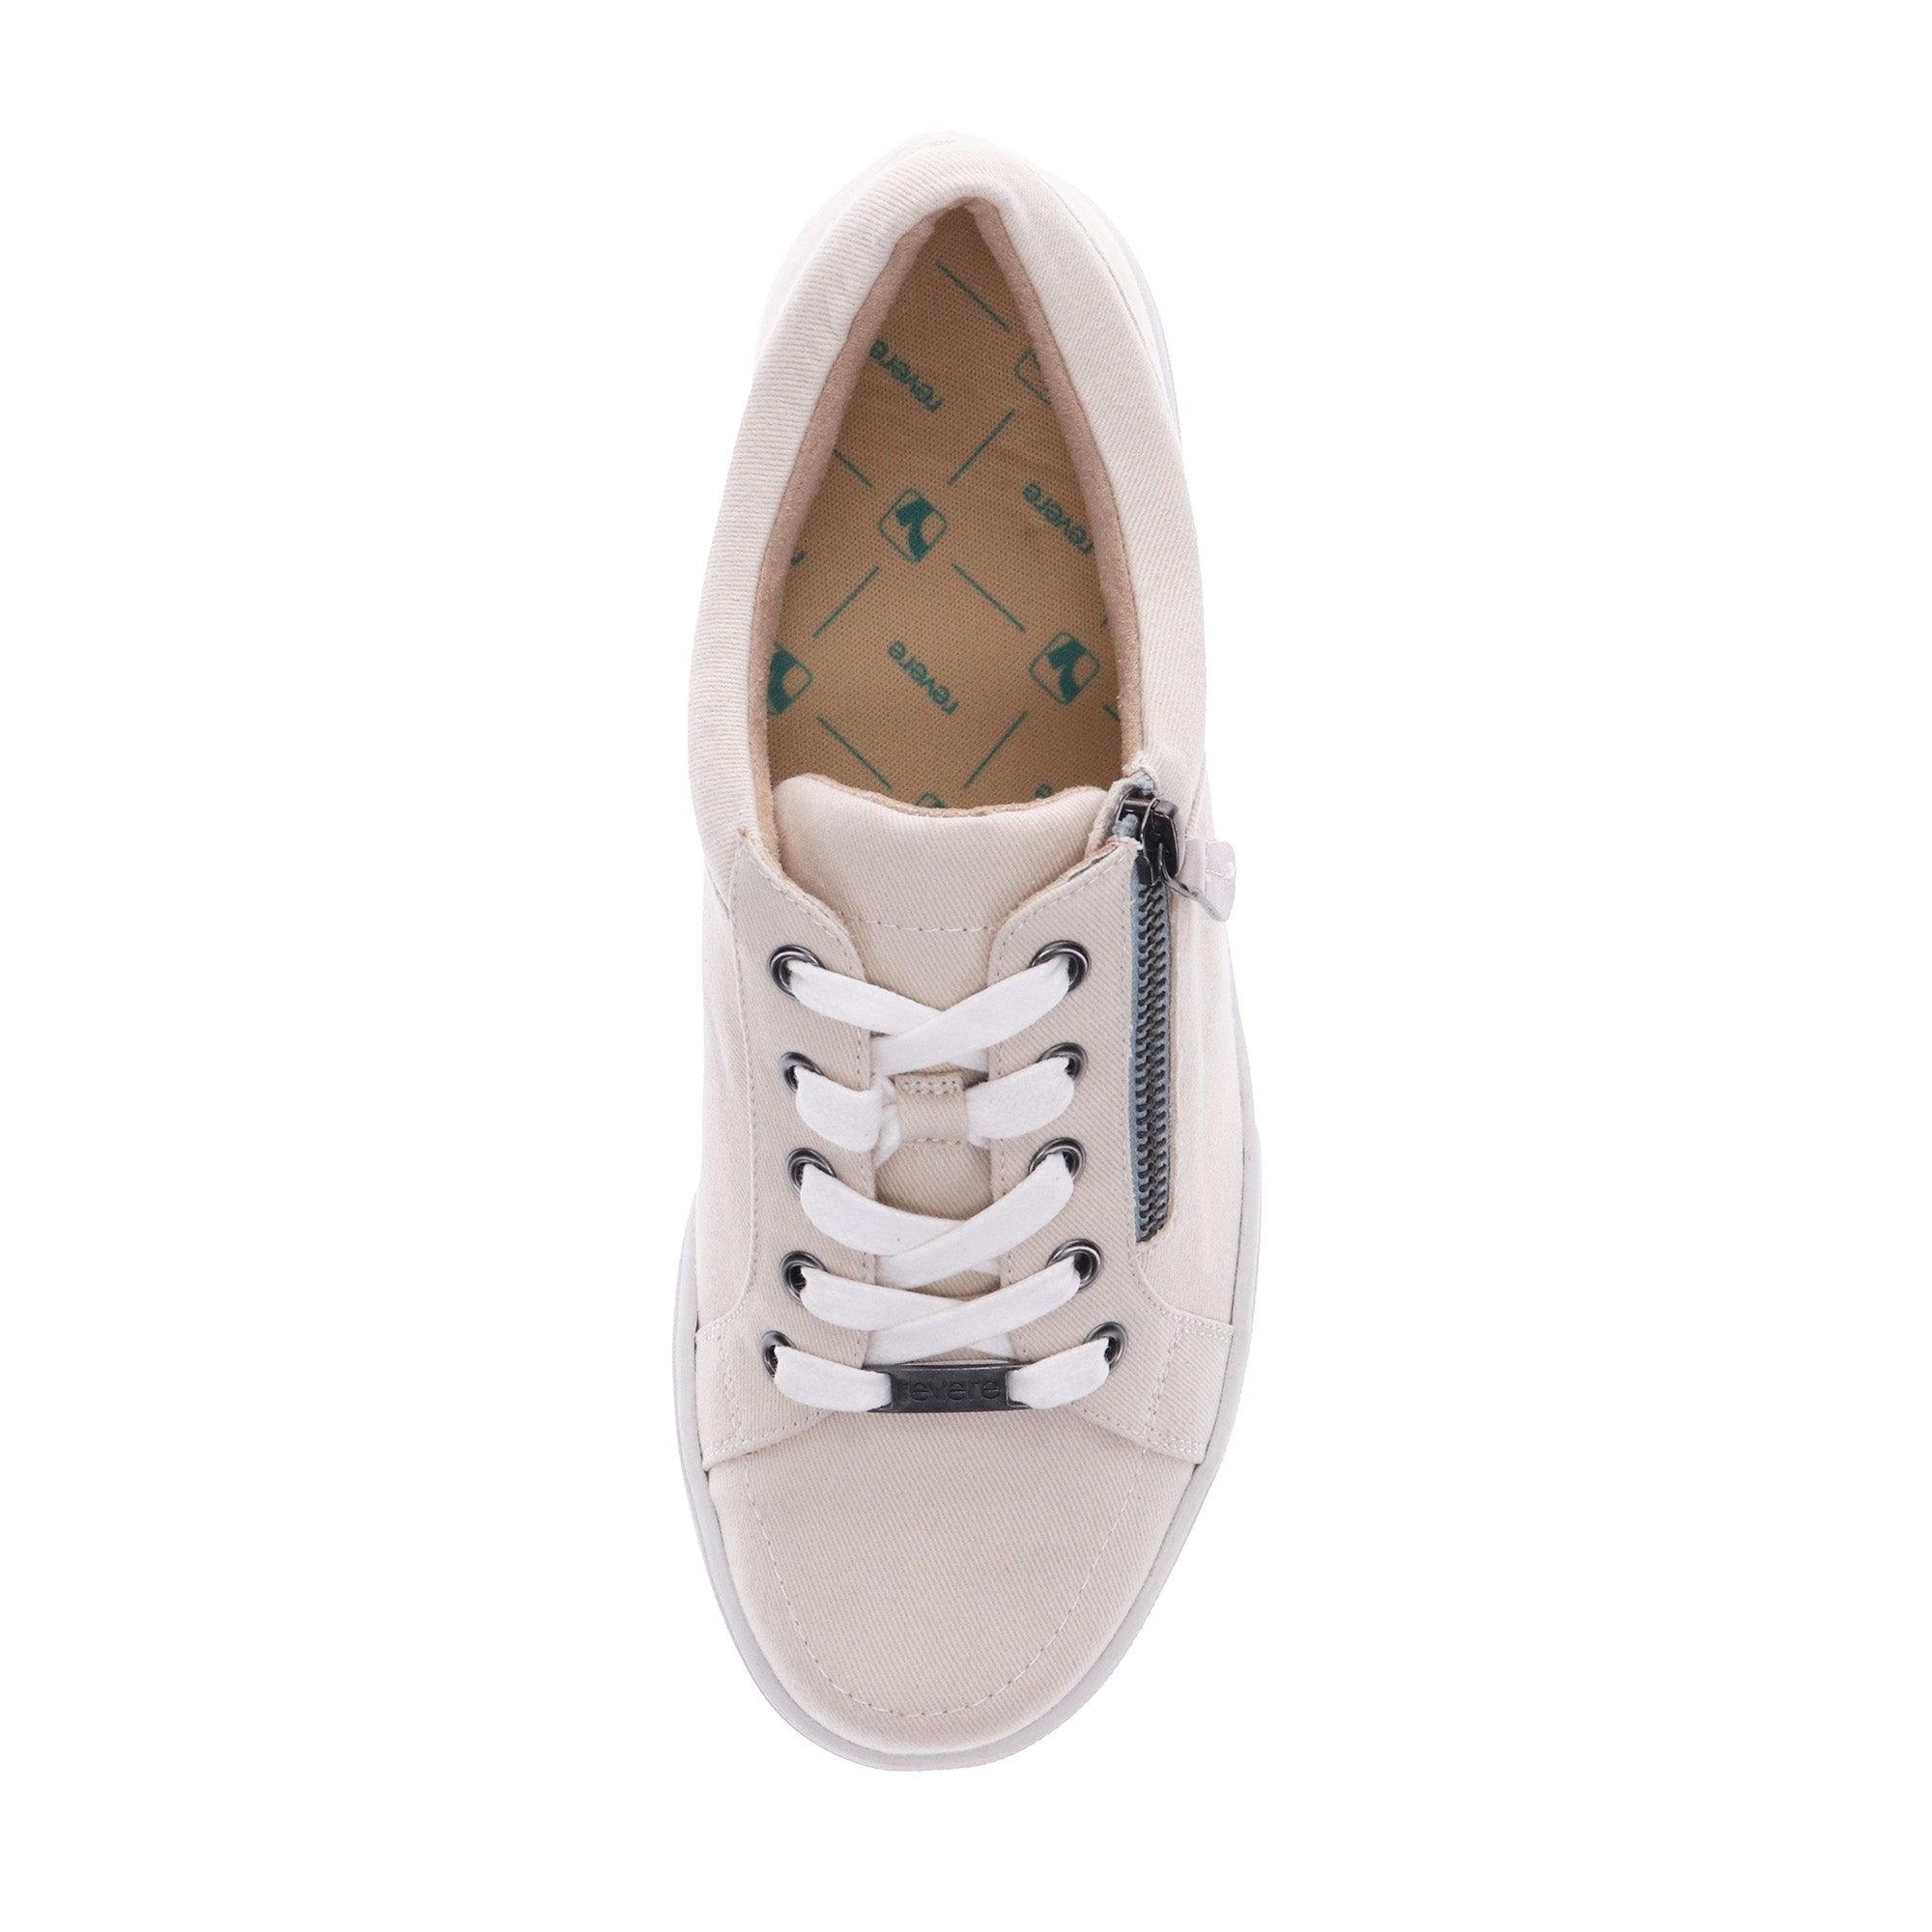 Ripon Canvas Sneakers - Revere Shoes